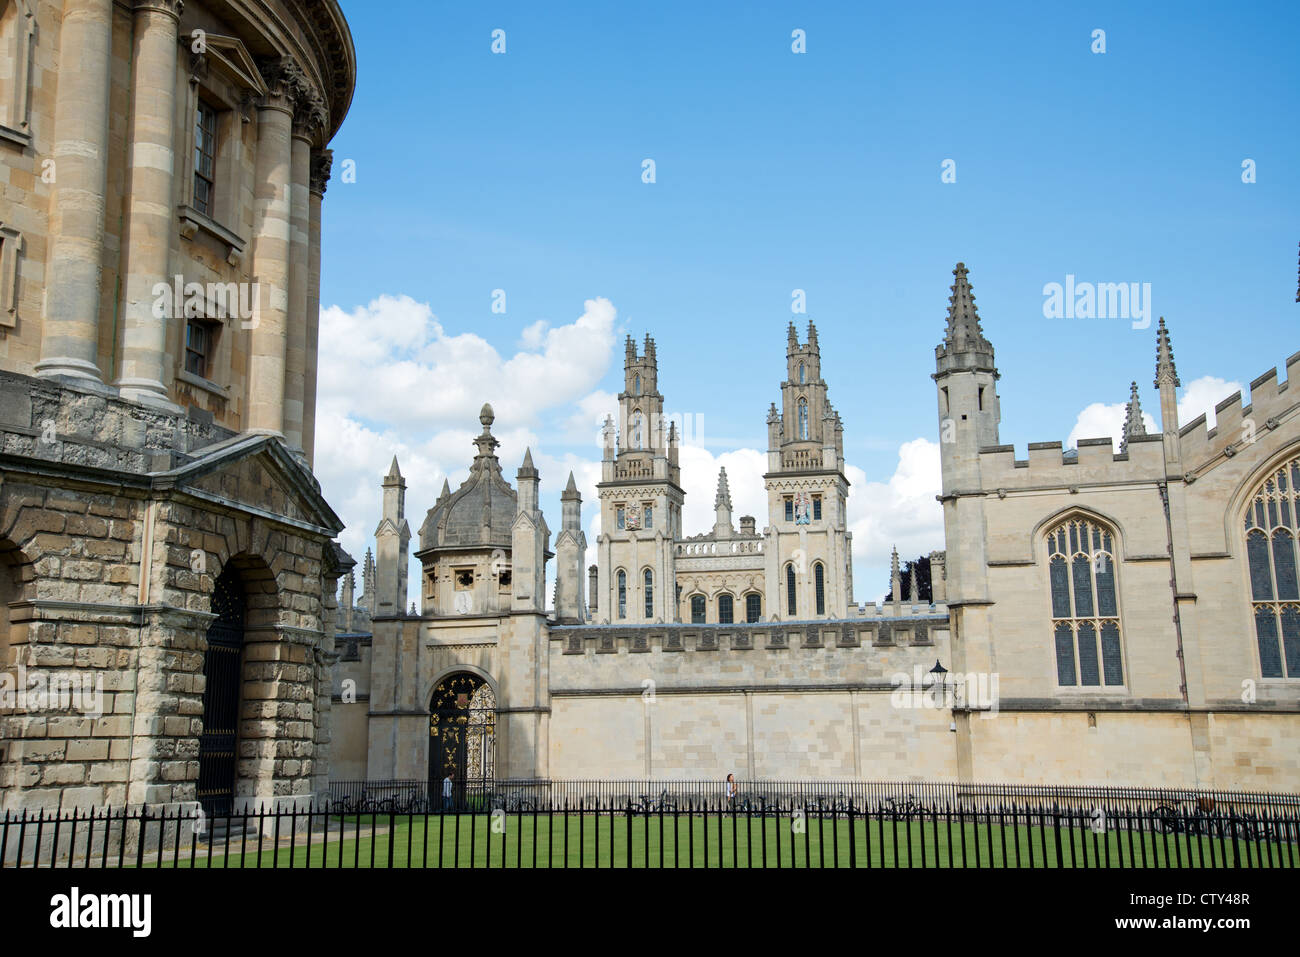 All Souls College from the Radcliffe Camera, Radcliffe Square, Oxford, Oxfordshire, England, United Kingdom Stock Photo